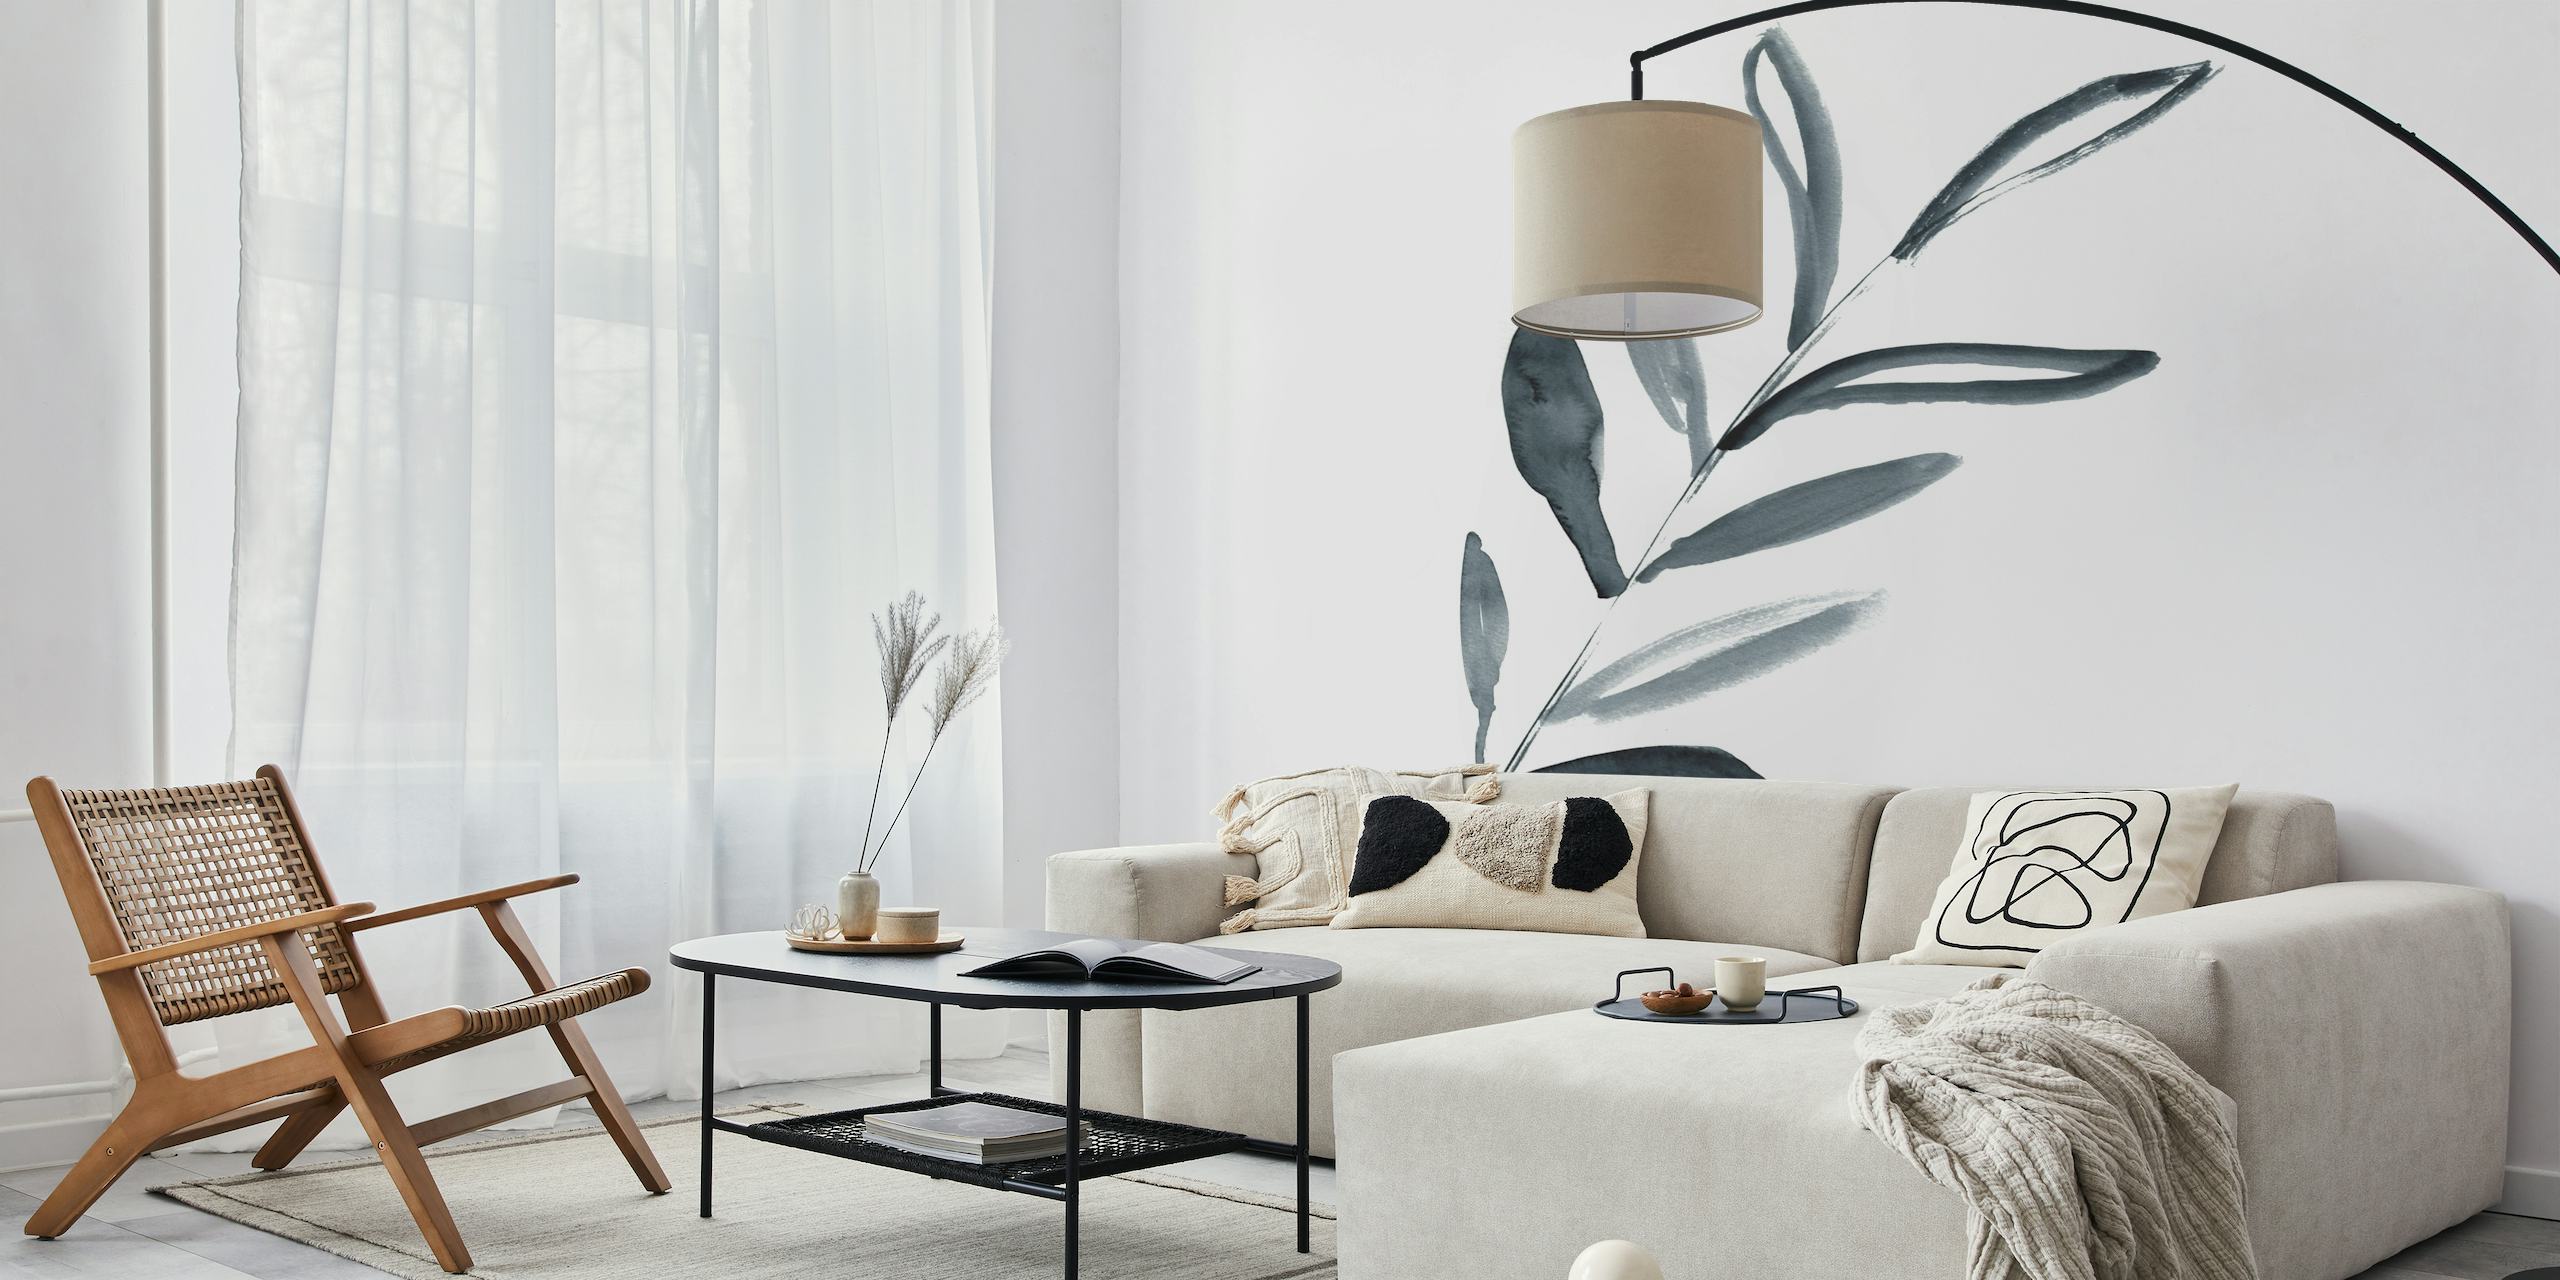 Monochrome hand-painted inky leaf sprig wall mural for a serene home decor ambiance.